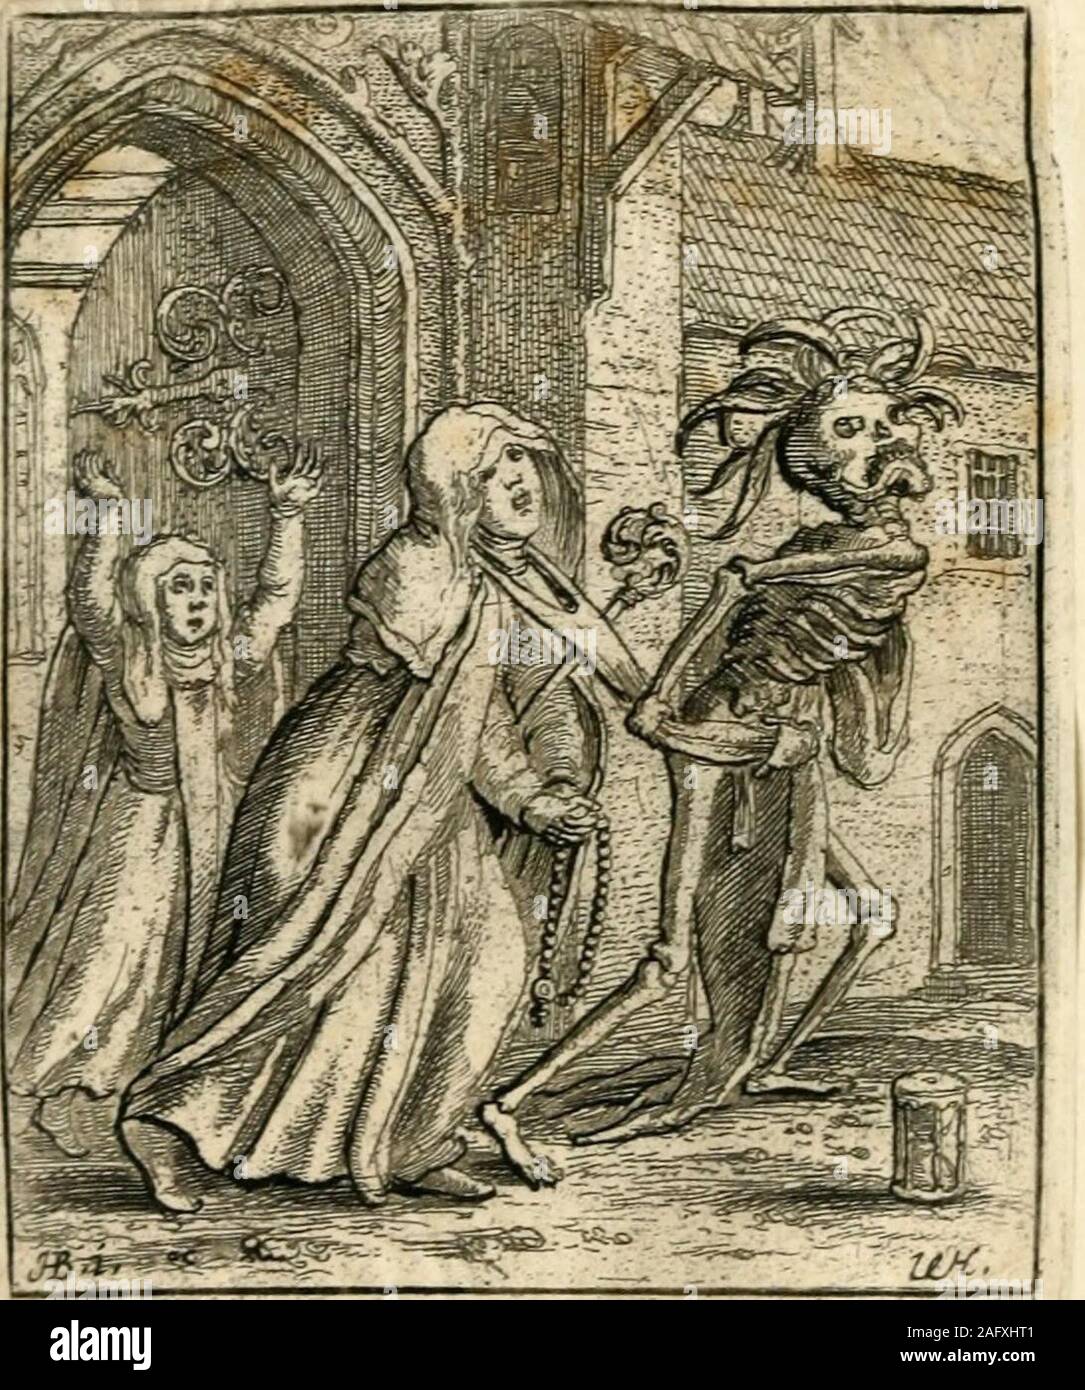 . The dance of death. iempi^fcitf ^ m -rrctcifcitud.iaTje rtu:Lri tur Uta*. ?s^rt*,- «»;. 55 THE ABBESS. XIV. DEATH, fantastically dressed in a sort ofmantle, with feathers on his head, exulting-y seizes the Abbess by the wimple, andleads her away from the convent; whilst a,nun in the back ground is piteously bewail-ing the fate of her mistress. 56 THE FRIAR. XV THIS poor mendicant is endeavouringto escape with his wallet and money-box fromthe clutches of Death, who has seized himby the cowl, and drags him away with greatviolence. Stock Photo